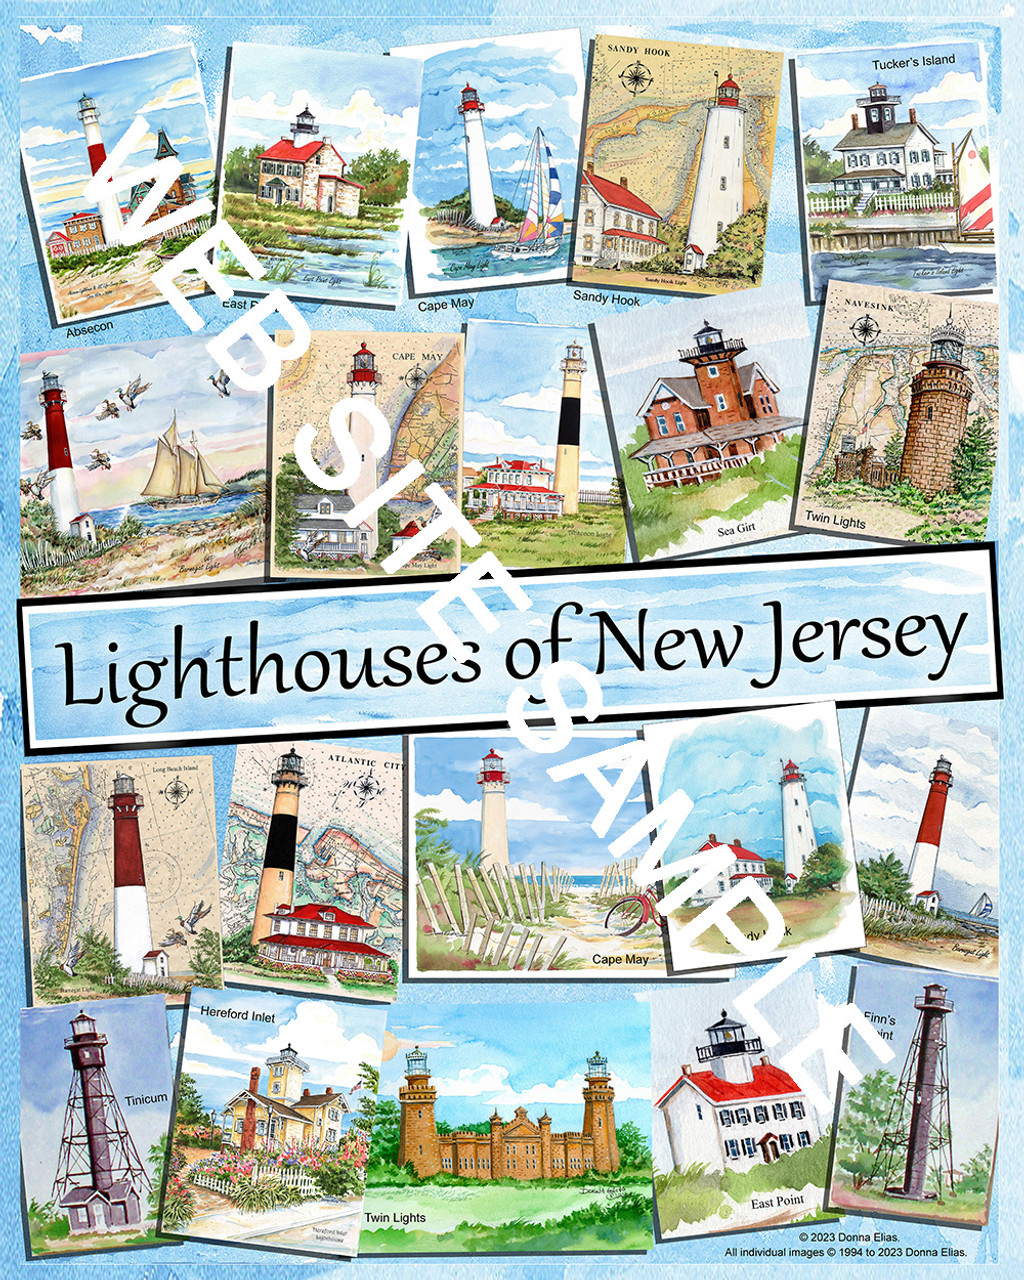 Lights of New Jersey 2023 Collage copyright Donna Elias.